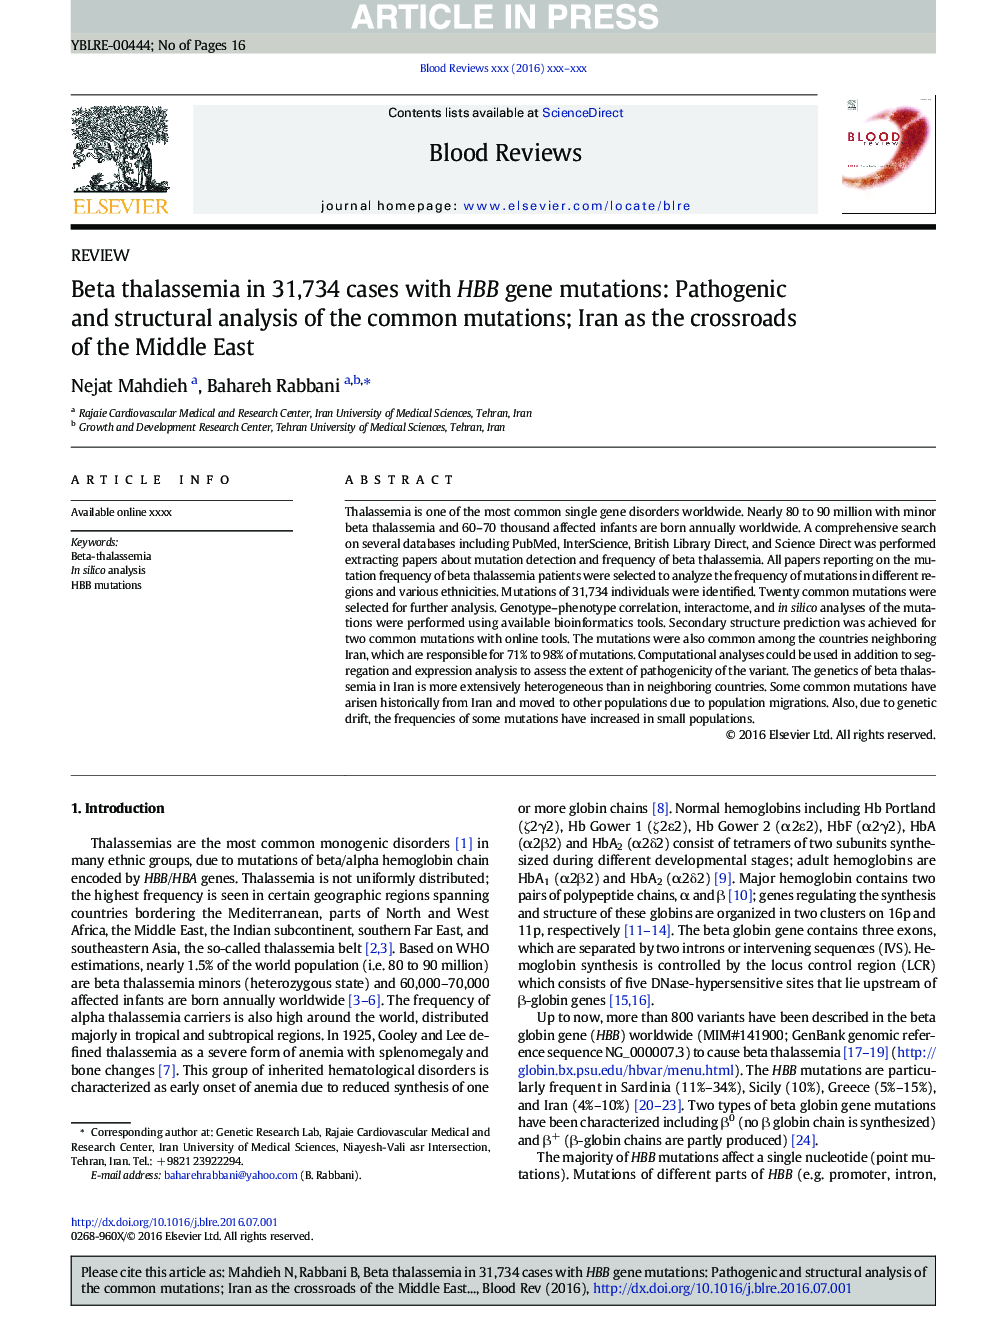 Beta thalassemia in 31,734 cases with HBB gene mutations: Pathogenic and structural analysis of the common mutations; Iran as the crossroads of the Middle East